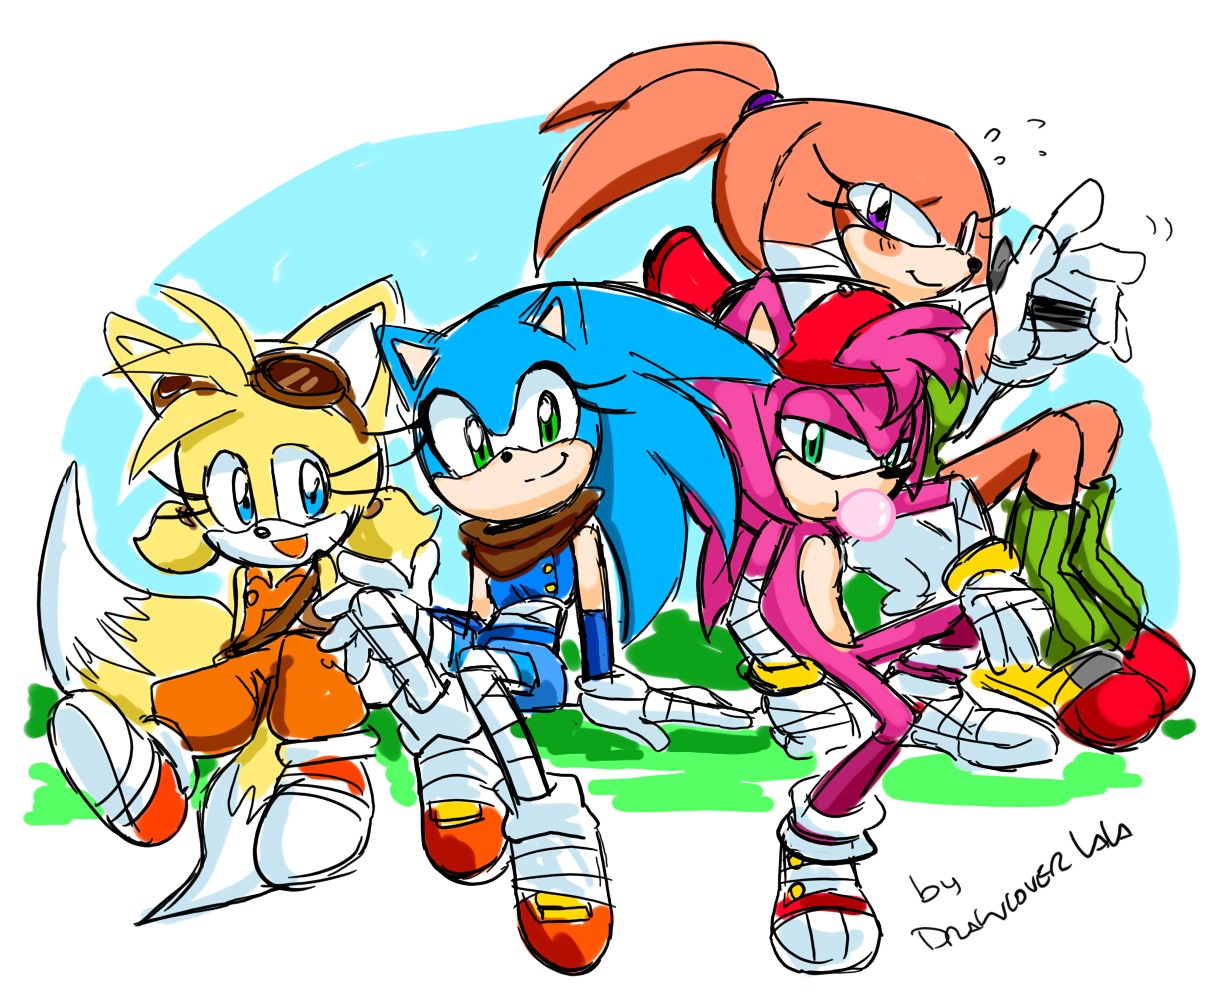 2. Sonic the Hedgehog: Gender and Pronouns - wide 3